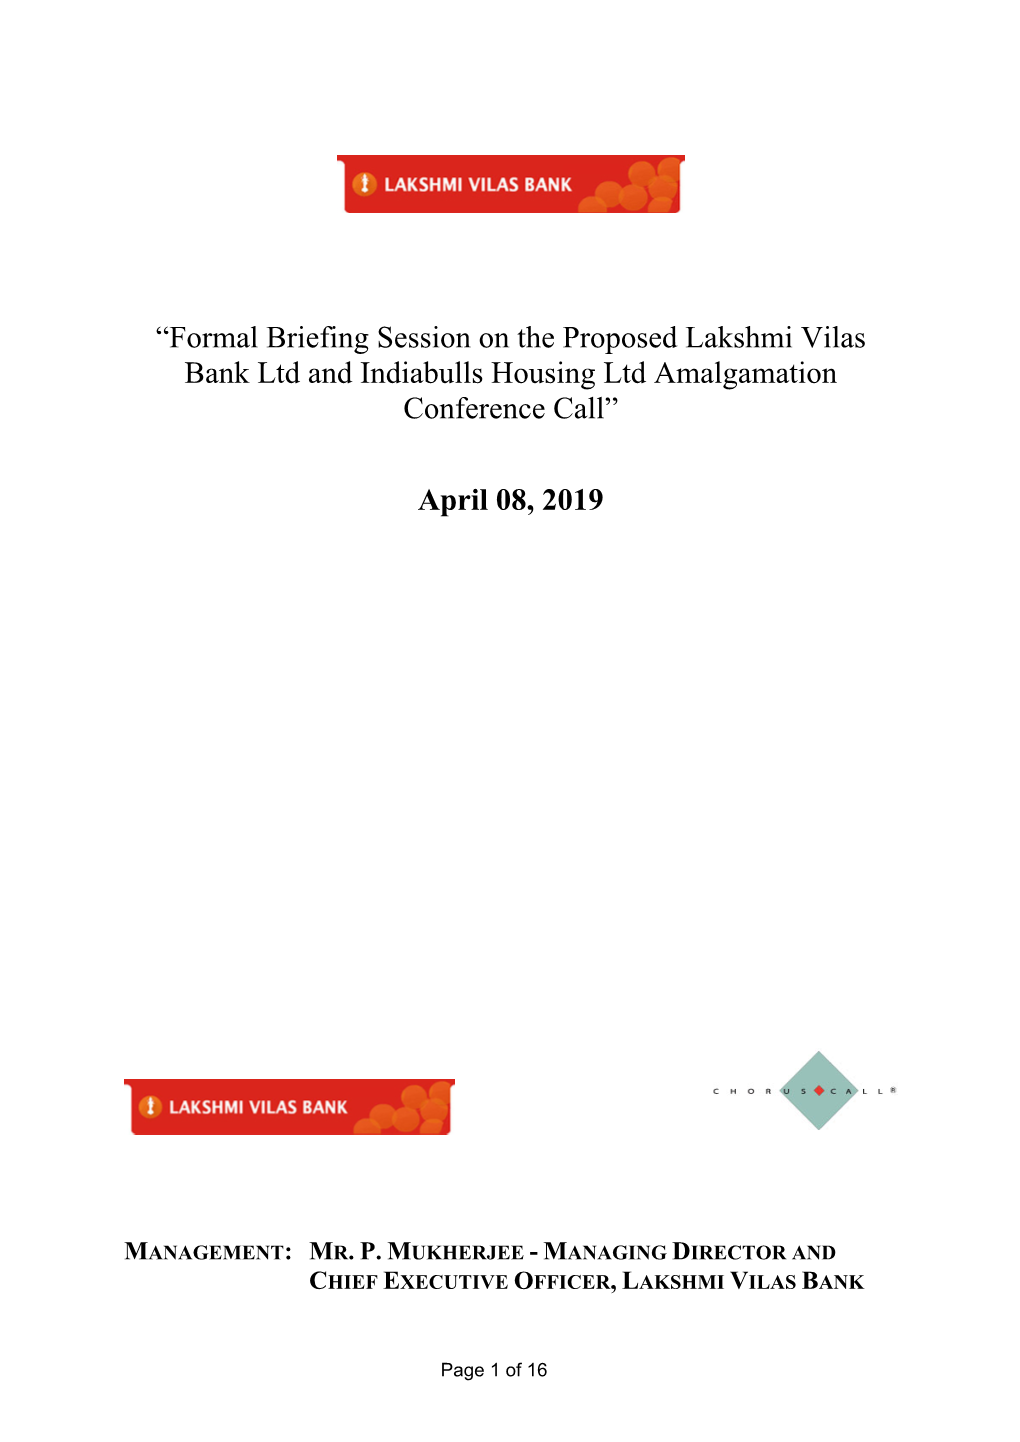 “Formal Briefing Session on the Proposed Lakshmi Vilas Bank Ltd and Indiabulls Housing Ltd Amalgamation Conference Call”